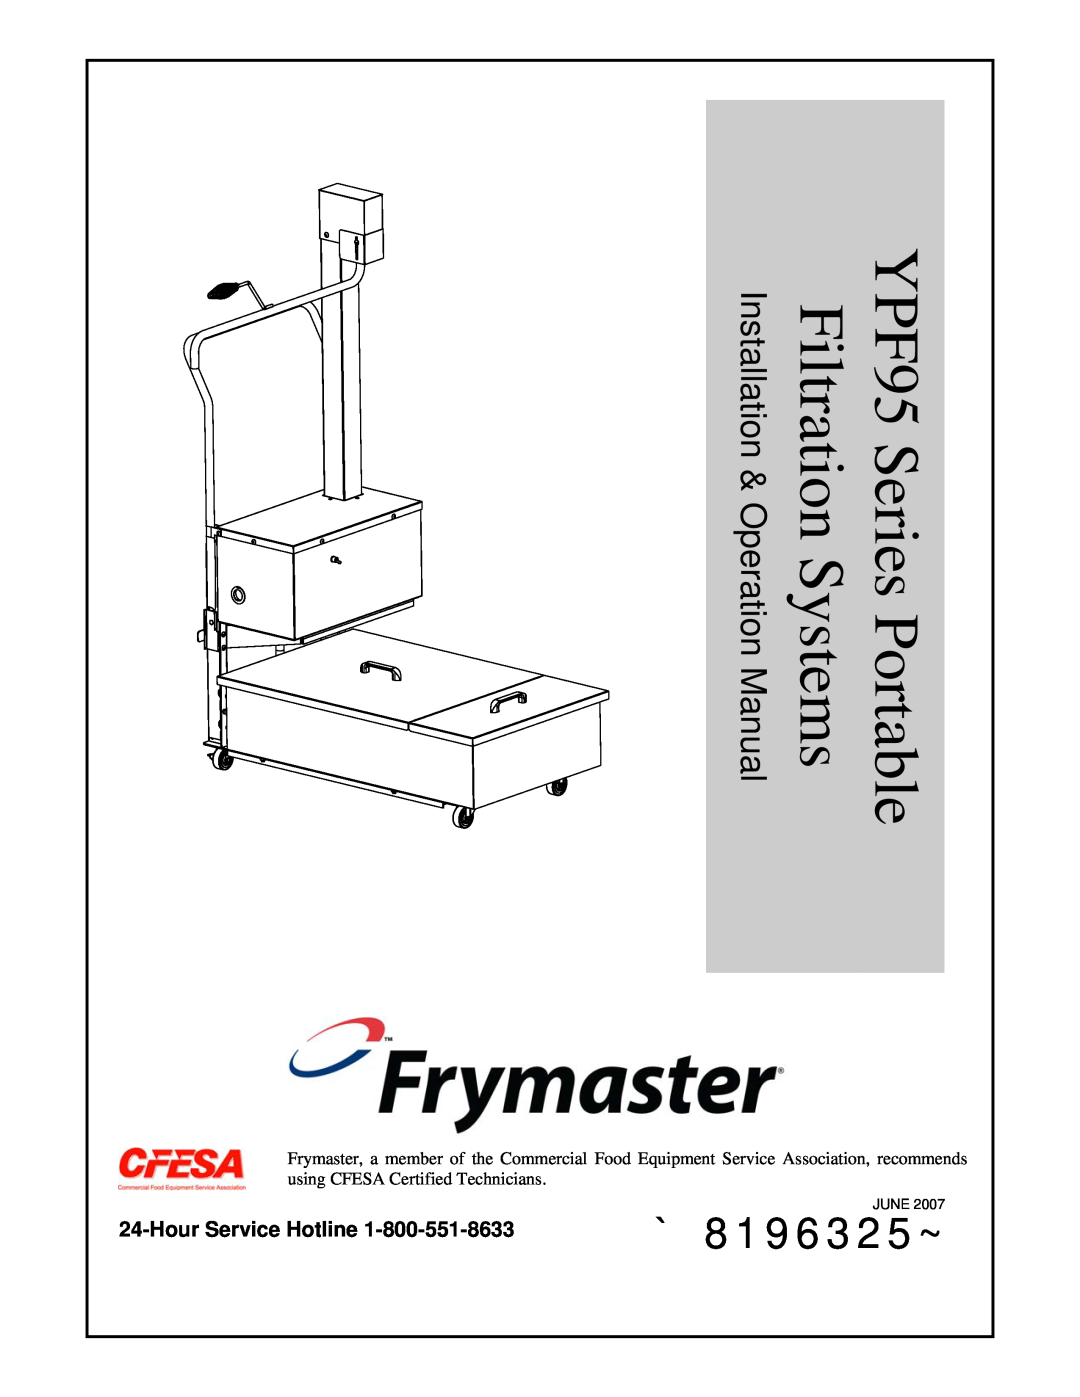 Frymaster operation manual `8196325~, HourService Hotline, June, YPF95 Series Portable, Filtration Systems 